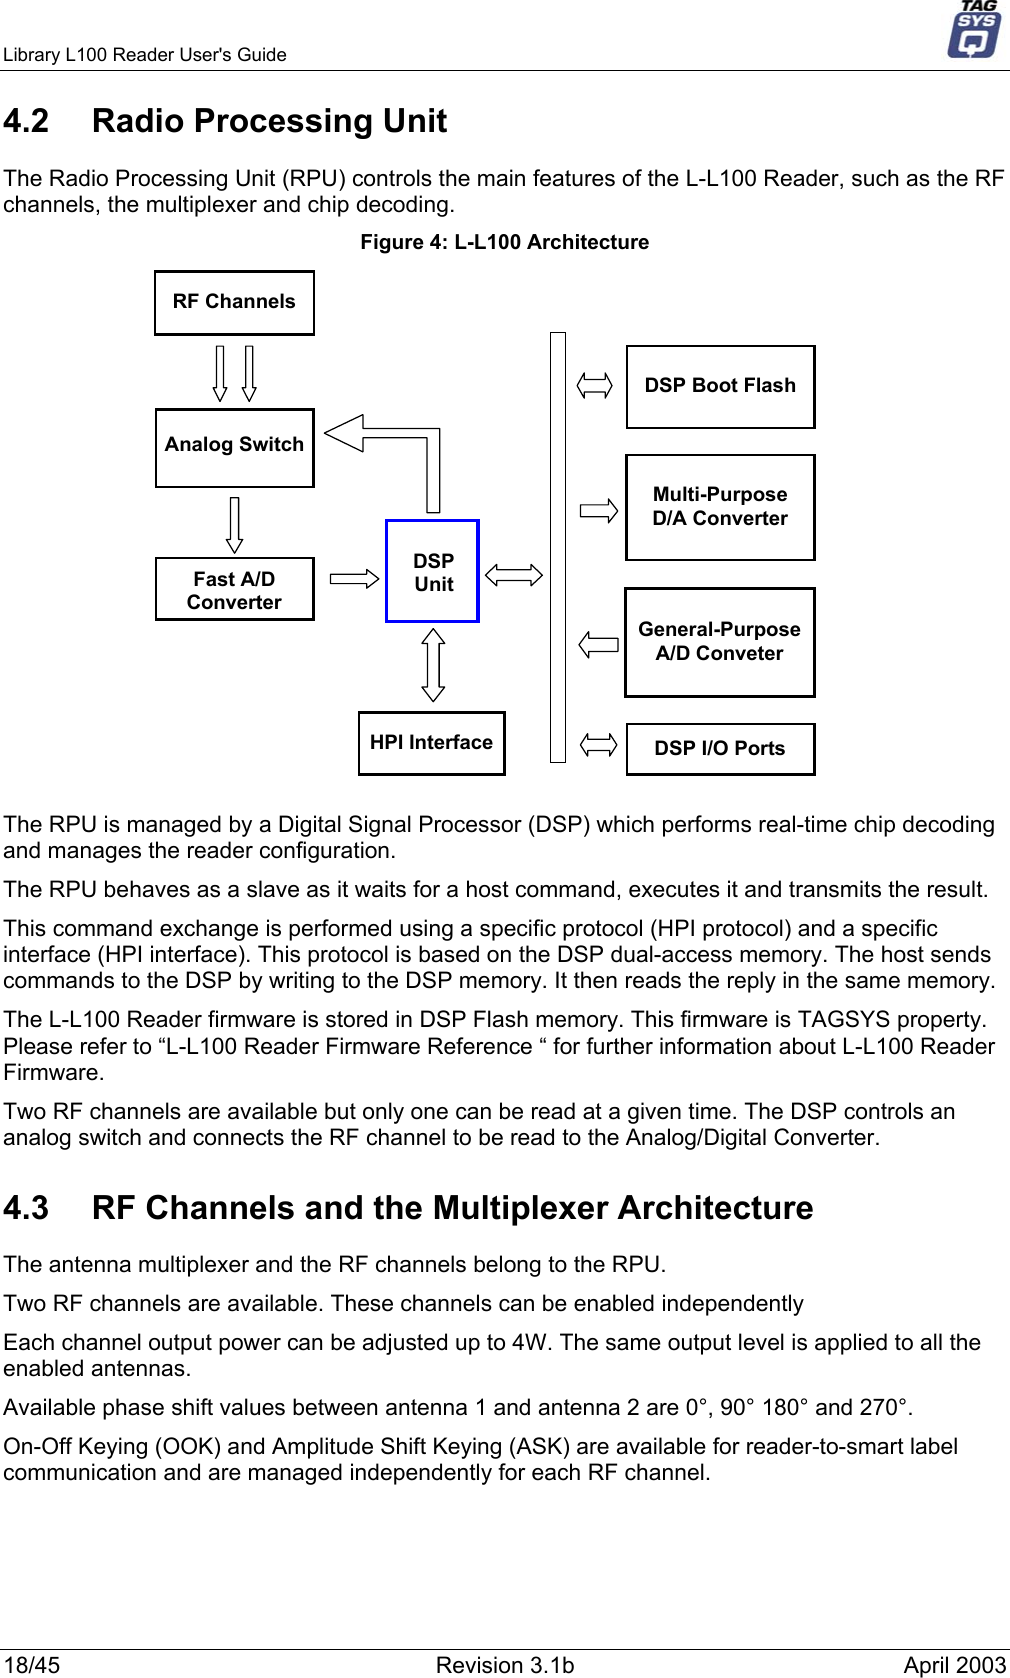 Library L100 Reader User&apos;s Guide     4.2  Radio Processing Unit The Radio Processing Unit (RPU) controls the main features of the L-L100 Reader, such as the RF channels, the multiplexer and chip decoding. Figure 4: L-L100 Architecture DSPUnitDSP Boot FlashMulti-PurposeD/A ConverterGeneral-PurposeA/D ConveterFast A/DConverterAnalog SwitchDSP I/O PortsRF ChannelsHPI Interface The RPU is managed by a Digital Signal Processor (DSP) which performs real-time chip decoding and manages the reader configuration. The RPU behaves as a slave as it waits for a host command, executes it and transmits the result.  This command exchange is performed using a specific protocol (HPI protocol) and a specific interface (HPI interface). This protocol is based on the DSP dual-access memory. The host sends commands to the DSP by writing to the DSP memory. It then reads the reply in the same memory.  The L-L100 Reader firmware is stored in DSP Flash memory. This firmware is TAGSYS property. Please refer to “L-L100 Reader Firmware Reference “ for further information about L-L100 Reader Firmware. Two RF channels are available but only one can be read at a given time. The DSP controls an analog switch and connects the RF channel to be read to the Analog/Digital Converter. 4.3  RF Channels and the Multiplexer Architecture The antenna multiplexer and the RF channels belong to the RPU.  Two RF channels are available. These channels can be enabled independently Each channel output power can be adjusted up to 4W. The same output level is applied to all the enabled antennas. Available phase shift values between antenna 1 and antenna 2 are 0°, 90° 180° and 270°. On-Off Keying (OOK) and Amplitude Shift Keying (ASK) are available for reader-to-smart label communication and are managed independently for each RF channel. 18/45  Revision 3.1b  April 2003 